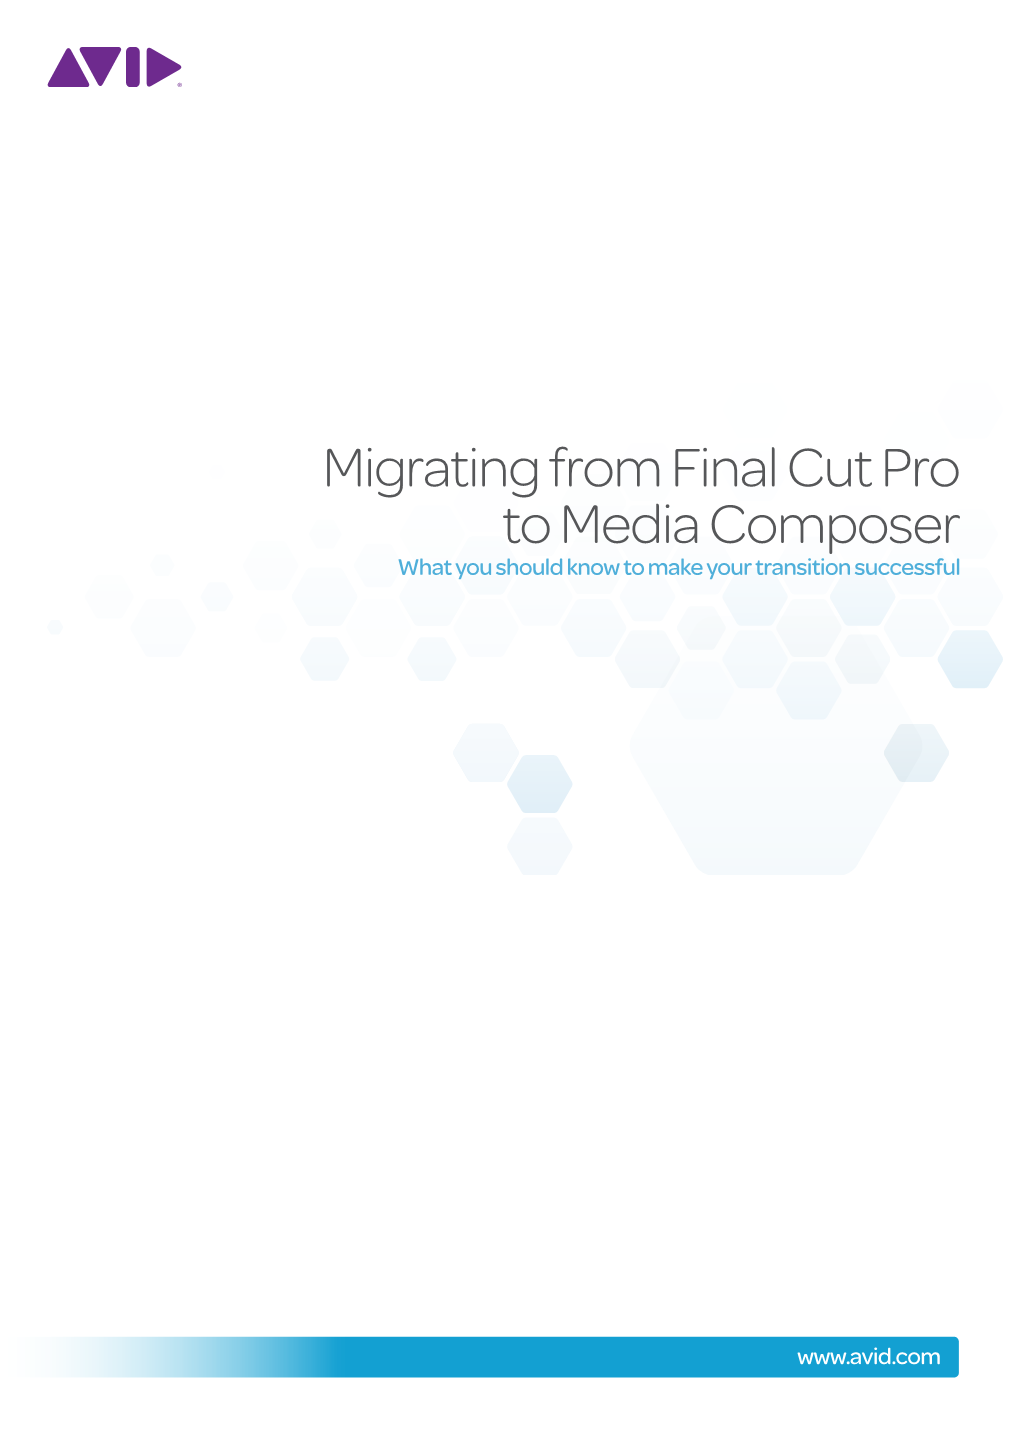 Migrating from Final Cut Pro to Media Composer What You Should Know to Make Your Transition Successful